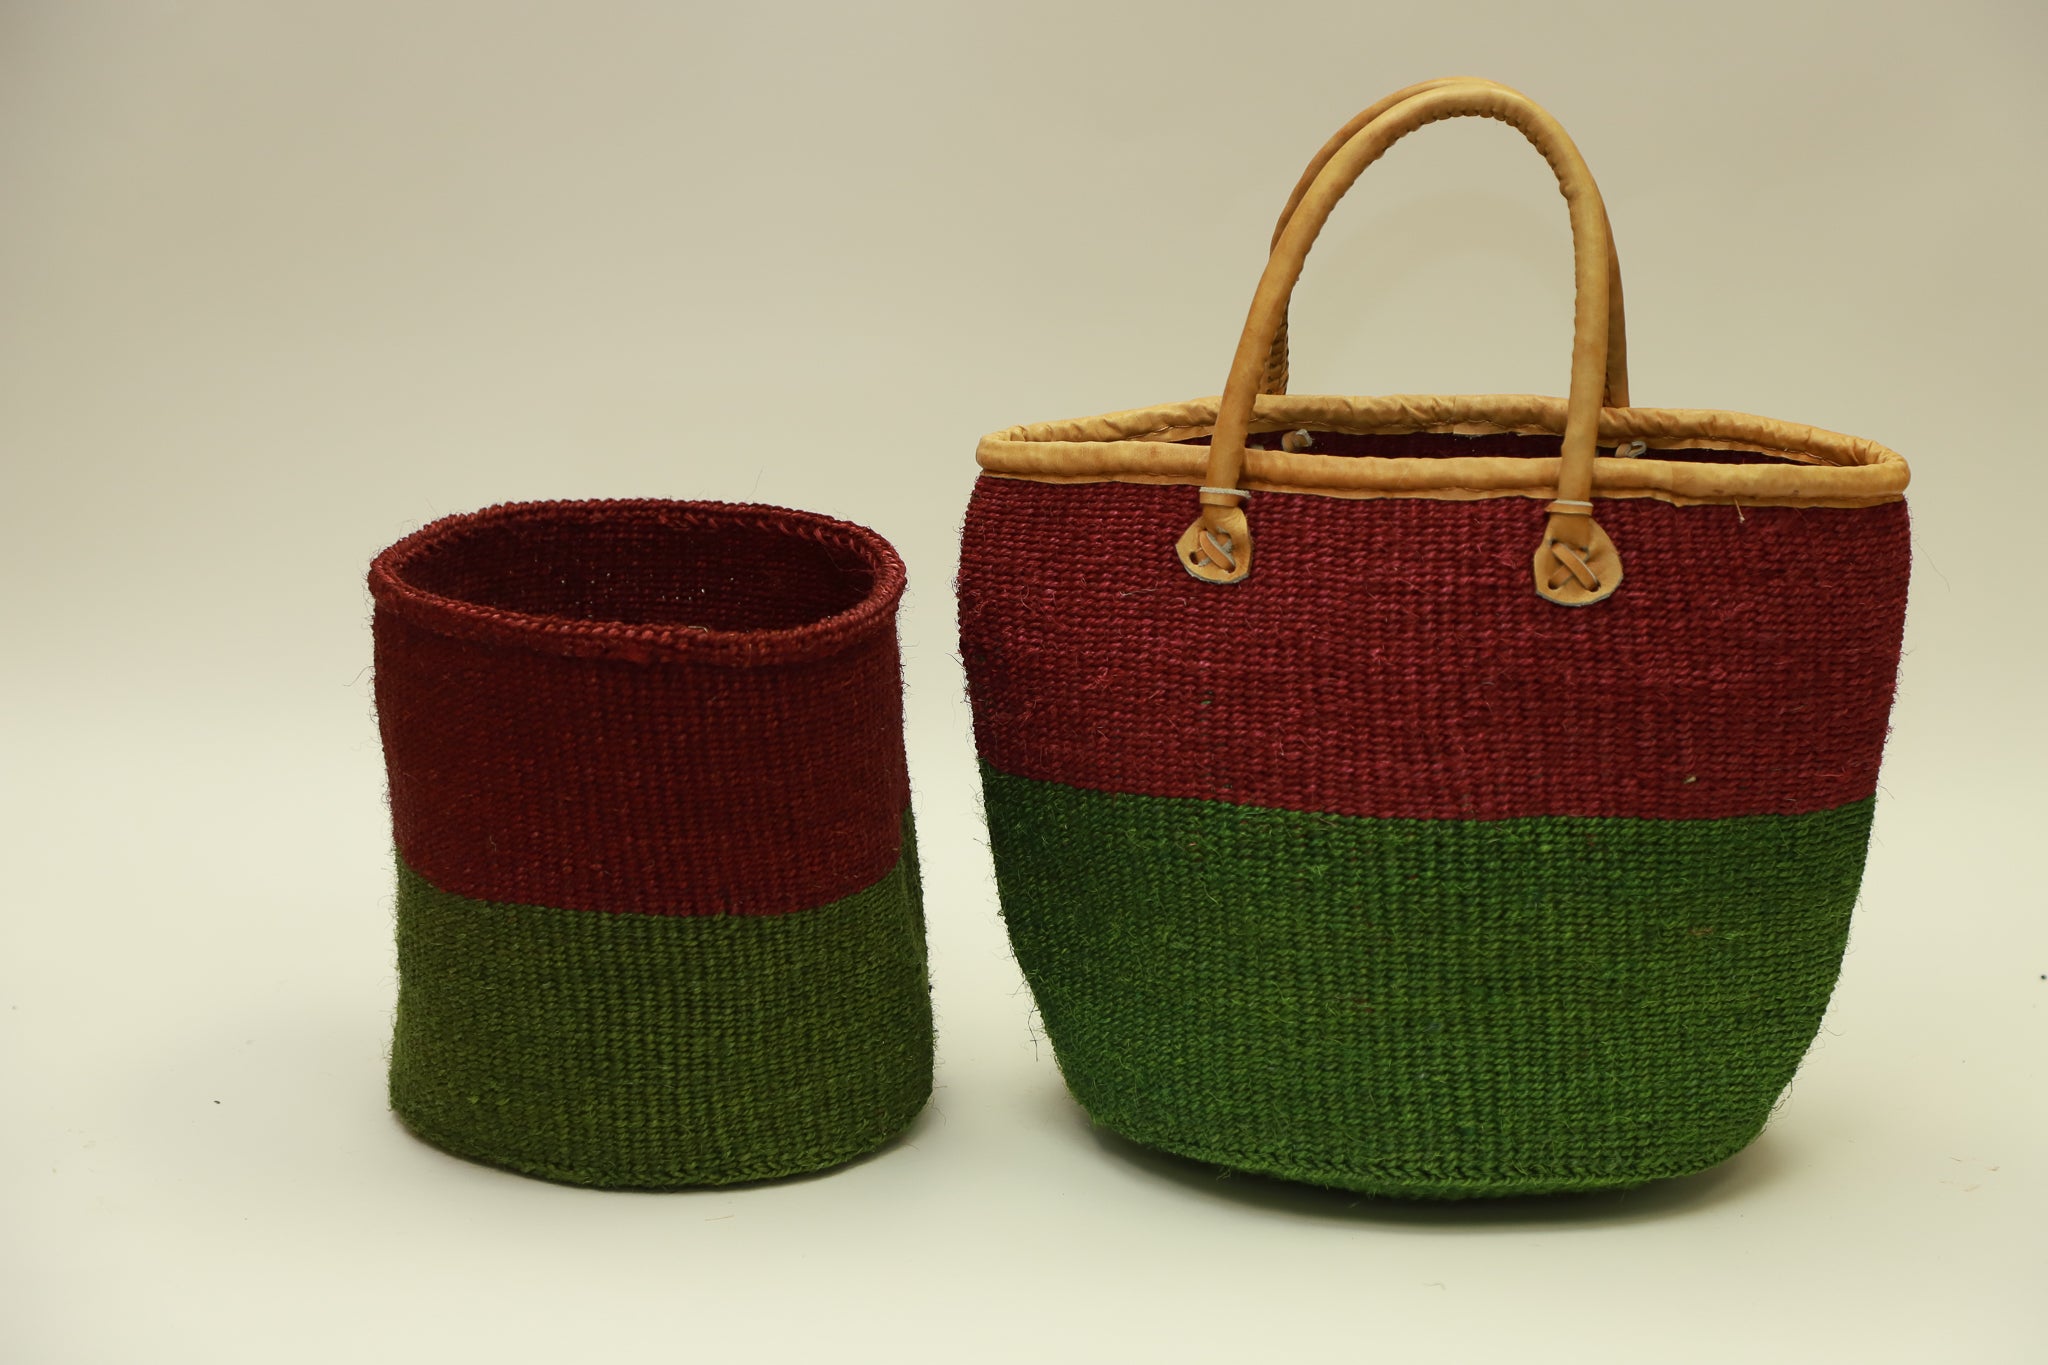 AFRICAN KIONDO  Two-Tone Handwoven Basket with handles for Storage Set  12” and 10” - Tobmarc Home Decor & Gifts 